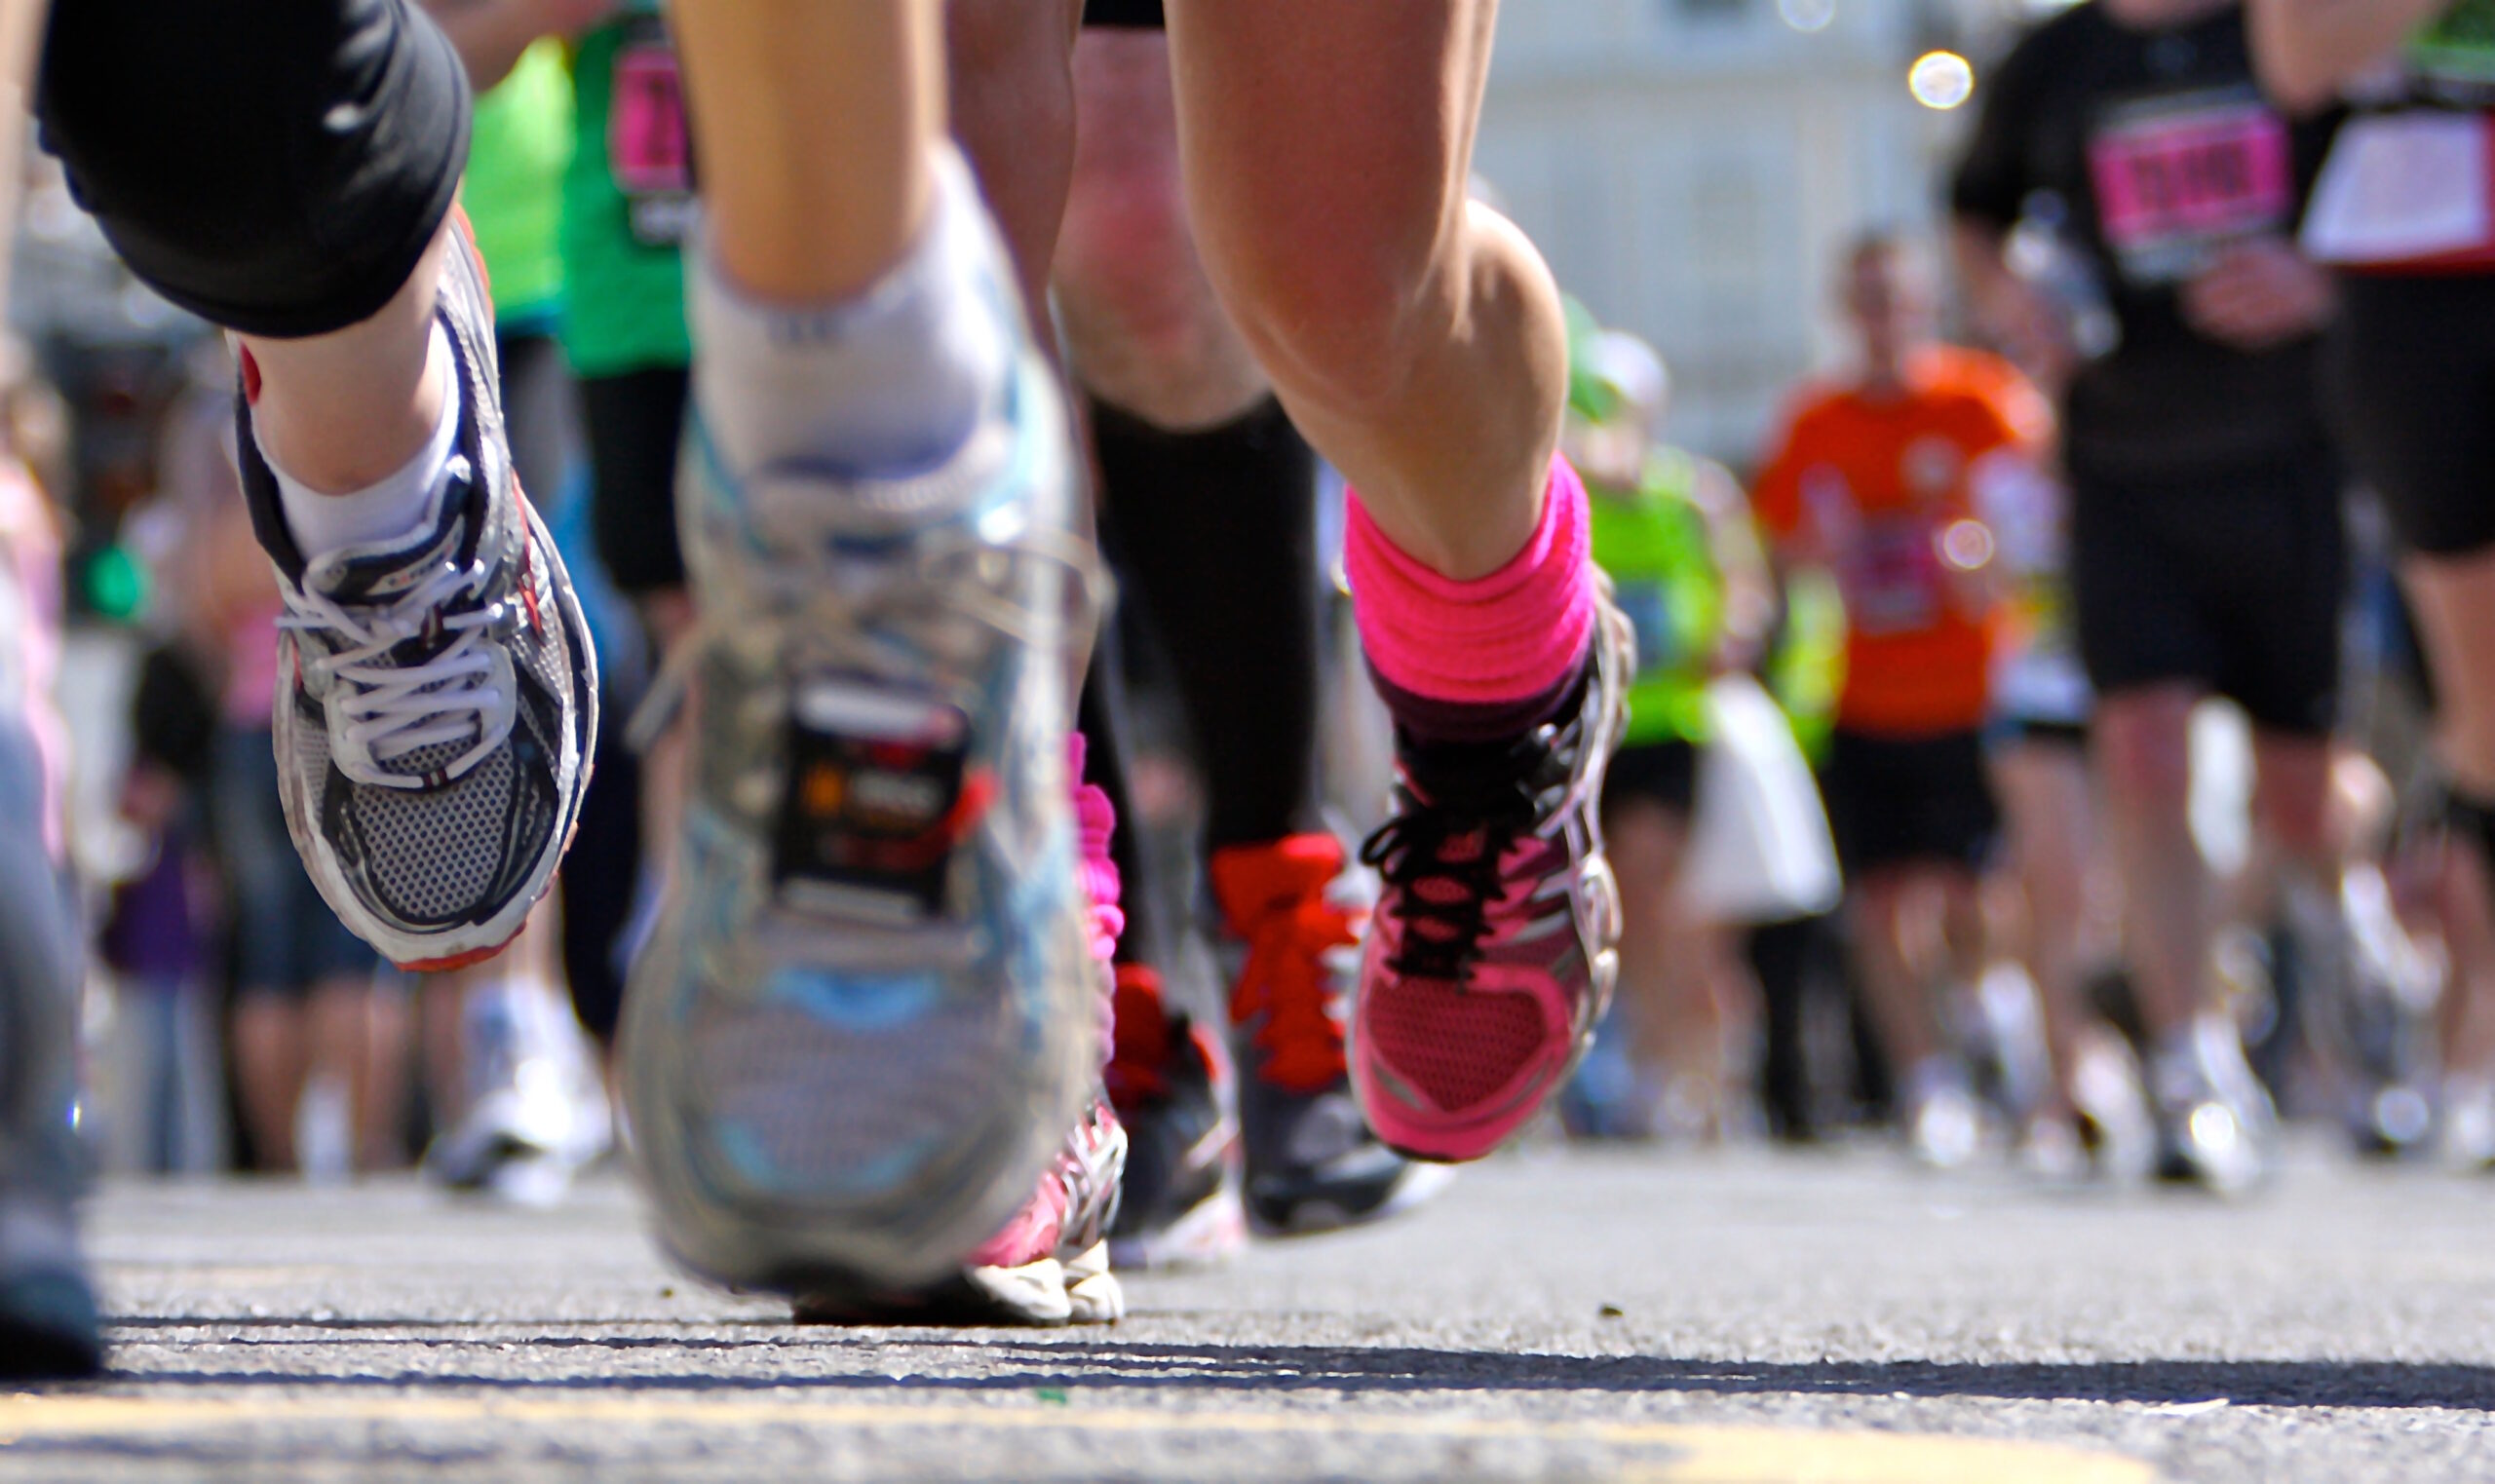 Runners taking part in the Hilton Head Marathon. Close up of feet and shoes